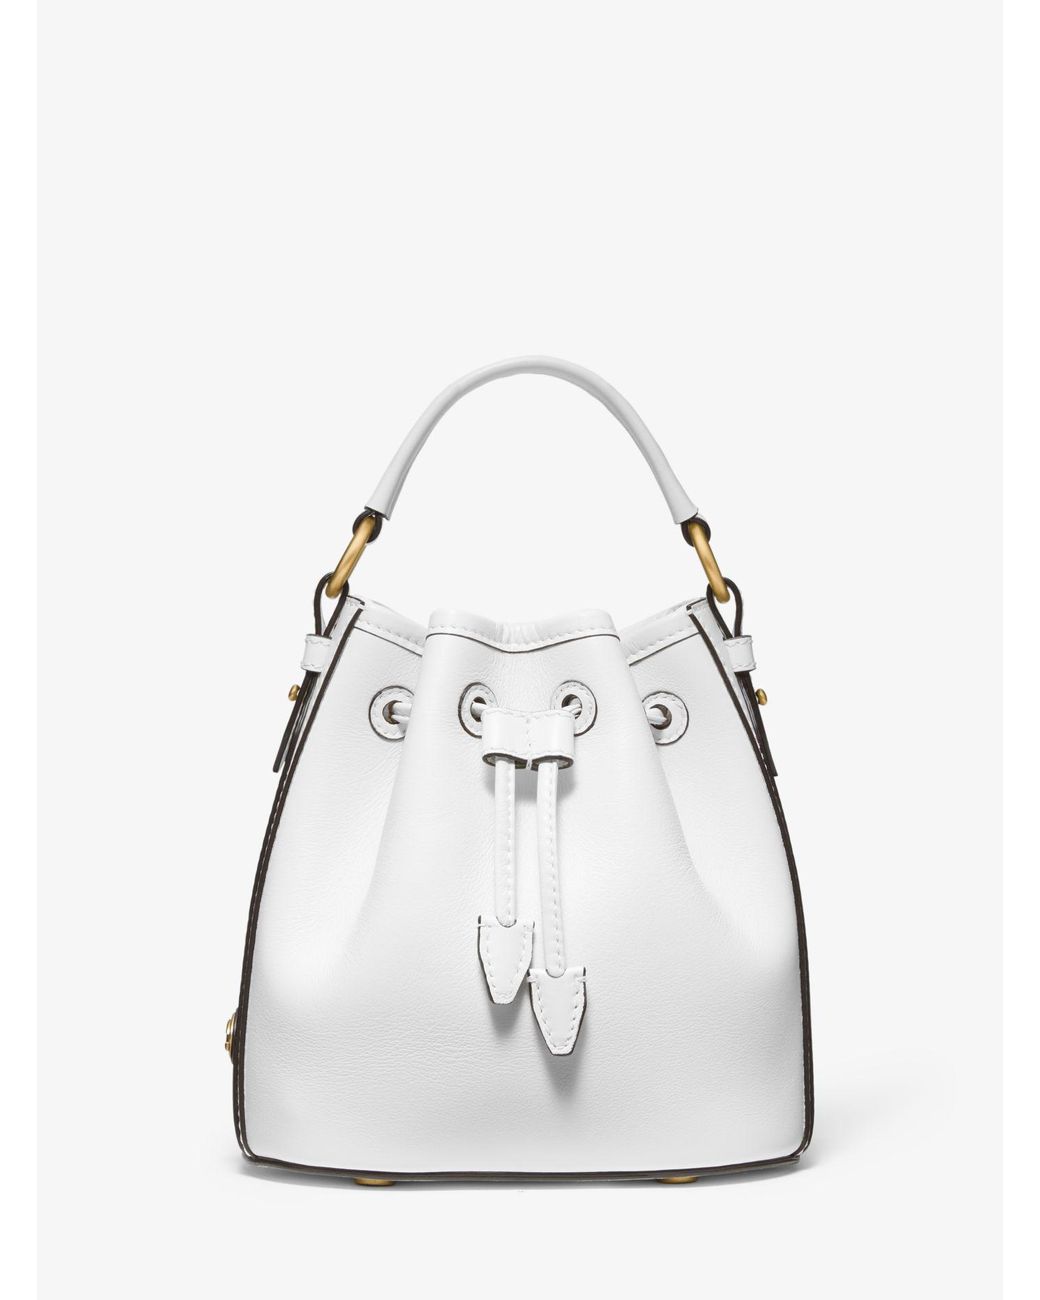 Michael Kors Monogramme Small Leather Bucket Bag in White - Lyst